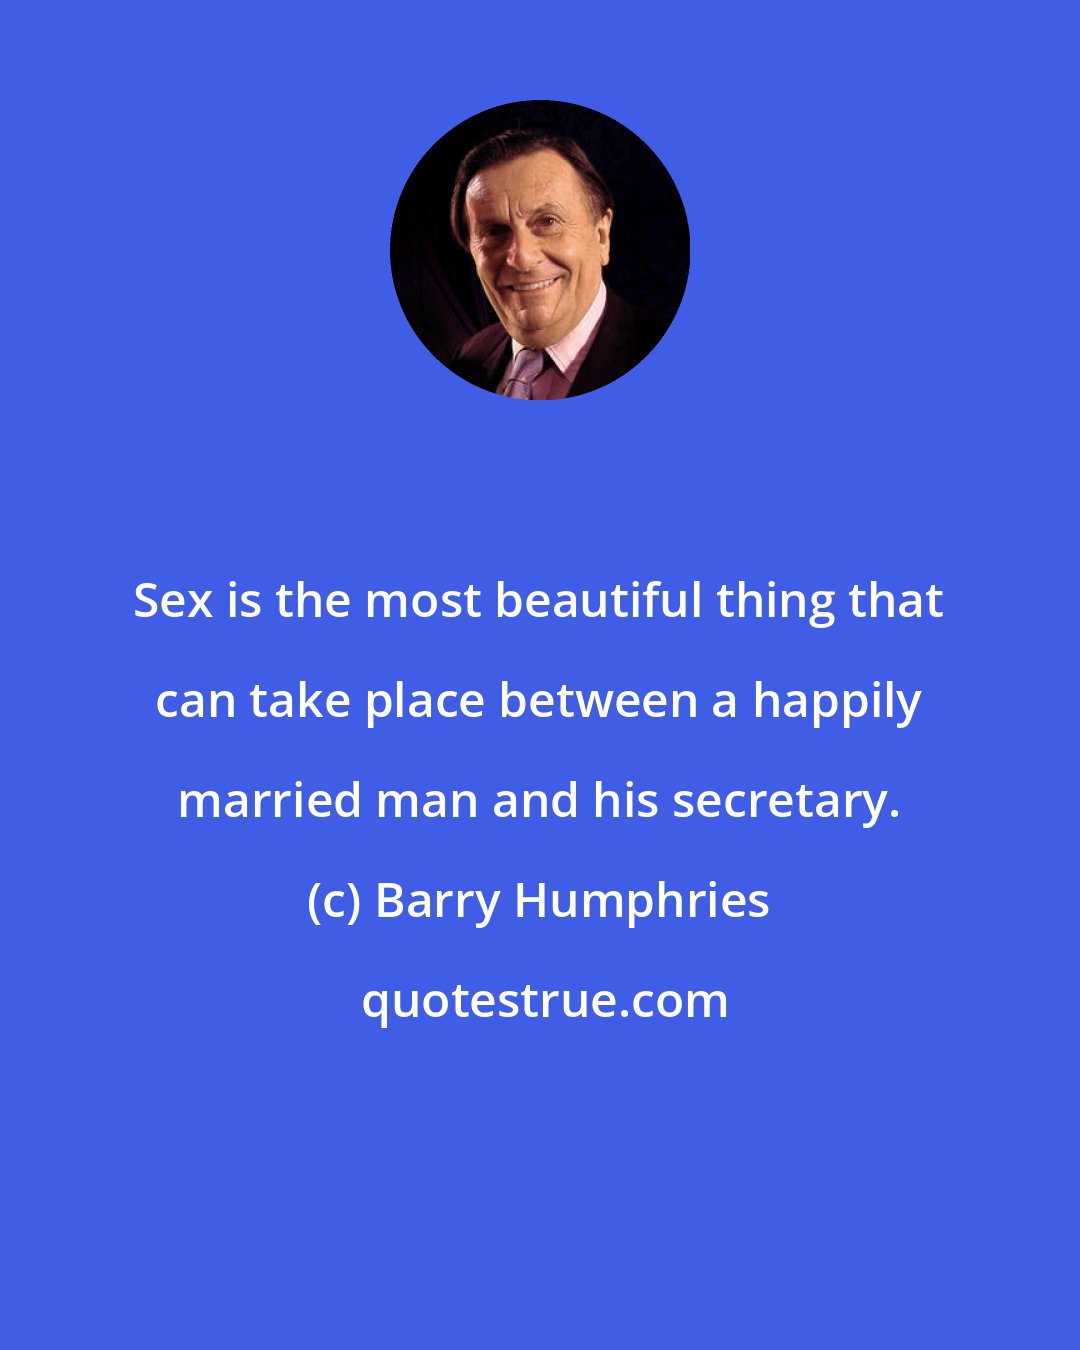 Barry Humphries: Sex is the most beautiful thing that can take place between a happily married man and his secretary.